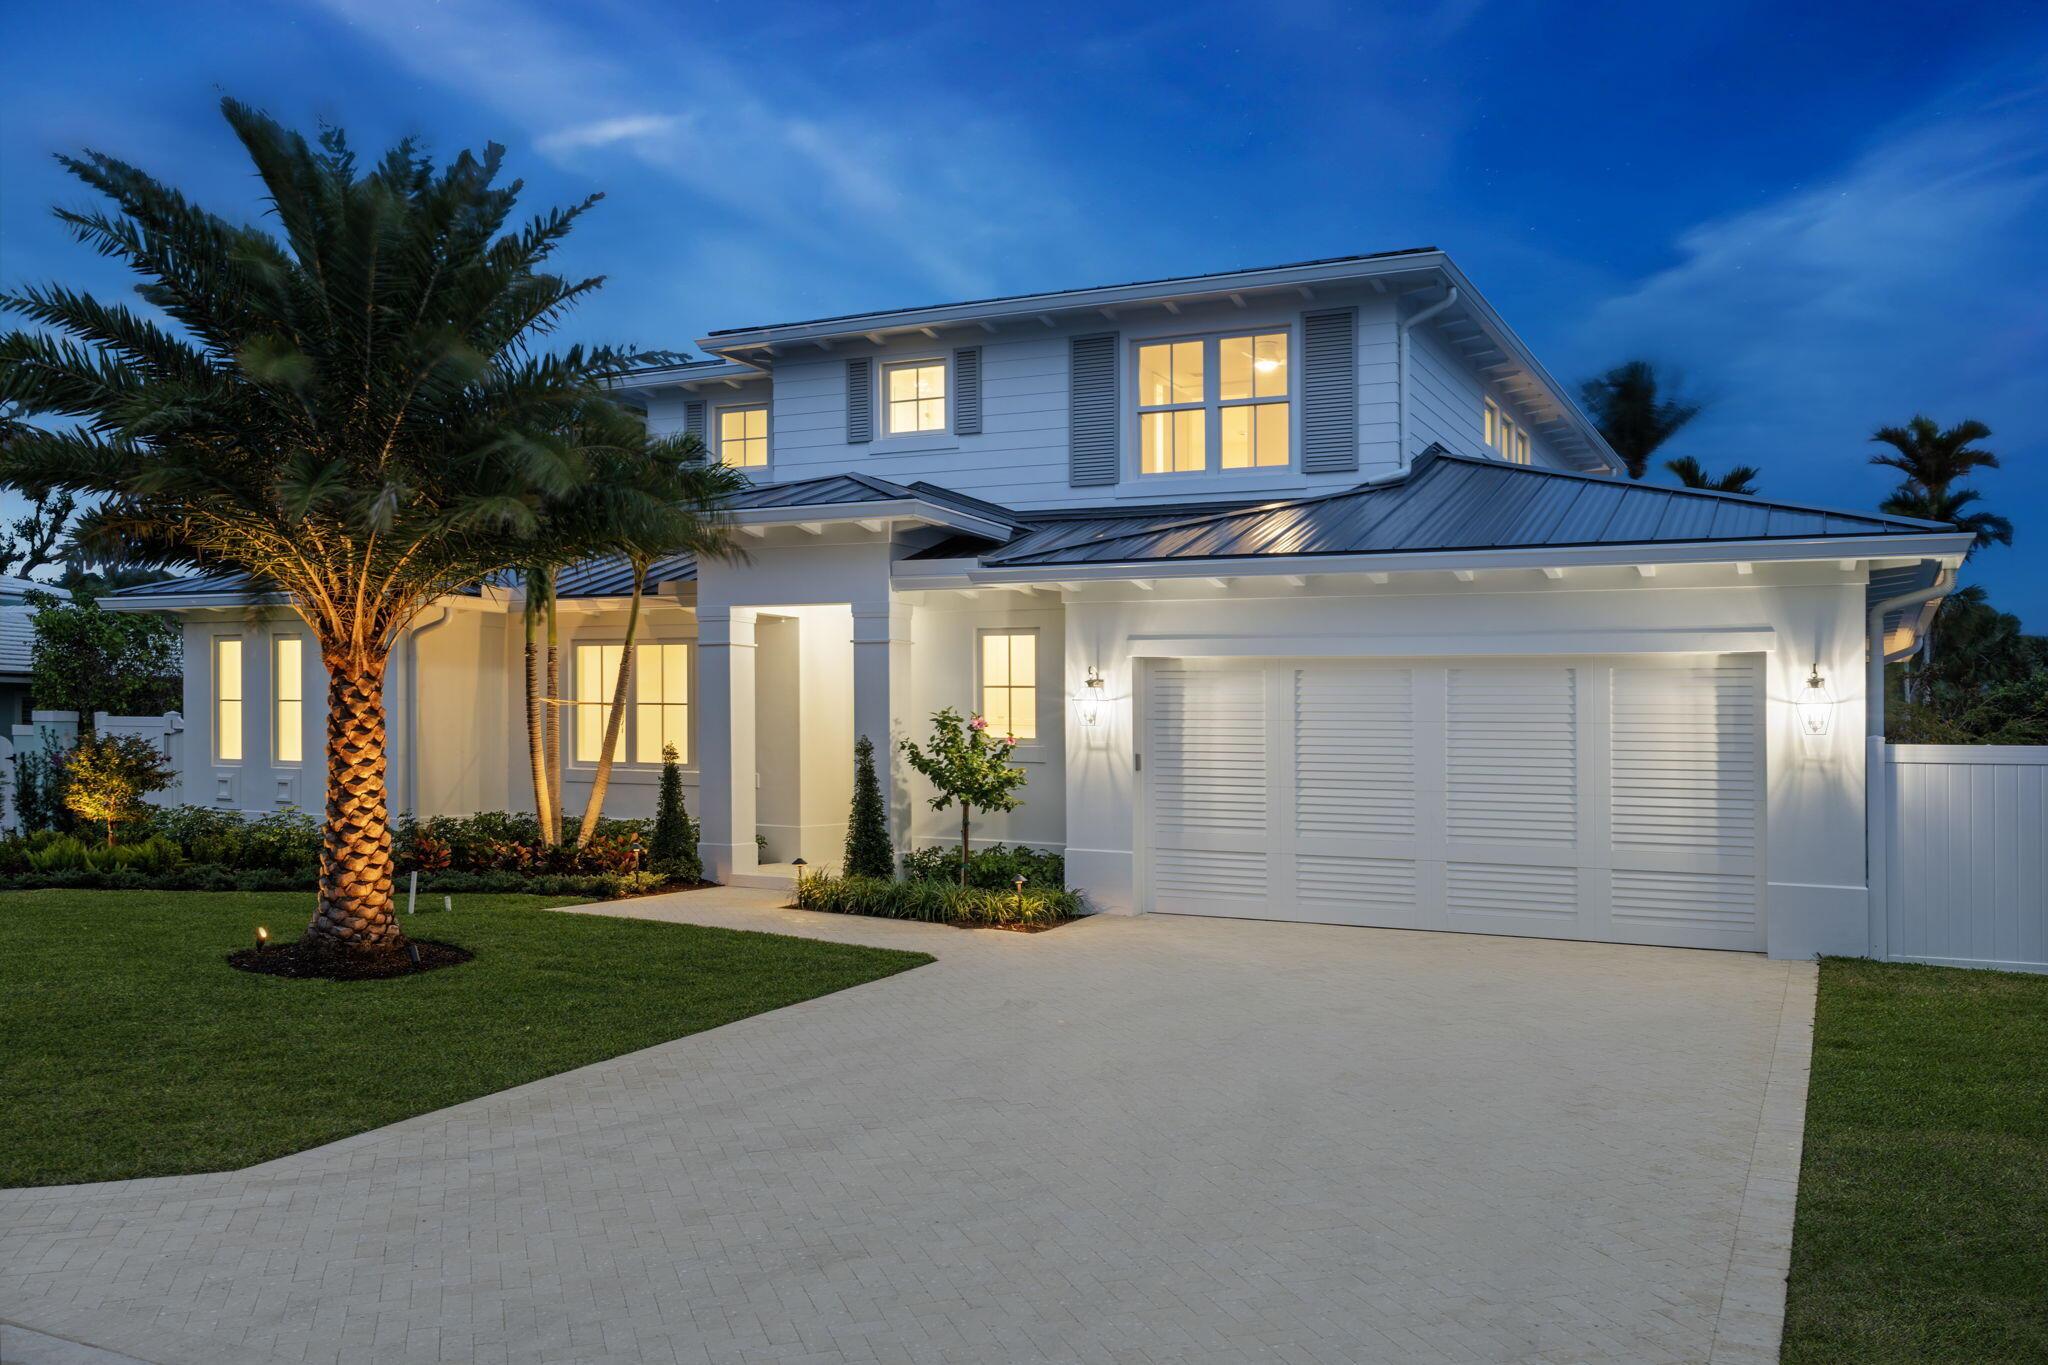 Experience coastal elegance in this 2023 Brand New construction residence, ideally positioned on the southern tip of Jupiter Island within the prestigious Jupiter Inlet Colony.Luxury abounds with French oak floors, built in custom closets, marble countertops in the bathrooms as well as beautiful trim work throughout the home. The kitchen, a culinary haven boasting Wolf and Sub-Zero appliances, caters to the most discerning tastes.This home boasts a first-floor Primary Suite, as well as a dedicated office space. Upstairs, discover views of the iconic Jupiter Lighthouse, accompanied by 3 En Suite Bedrooms and a loft, creating a blend of comfort and sophistication.Step outdoors to find a private pool, spa, and a beautiful summer kitchen amid lush greenery, creating a tranquil escape.